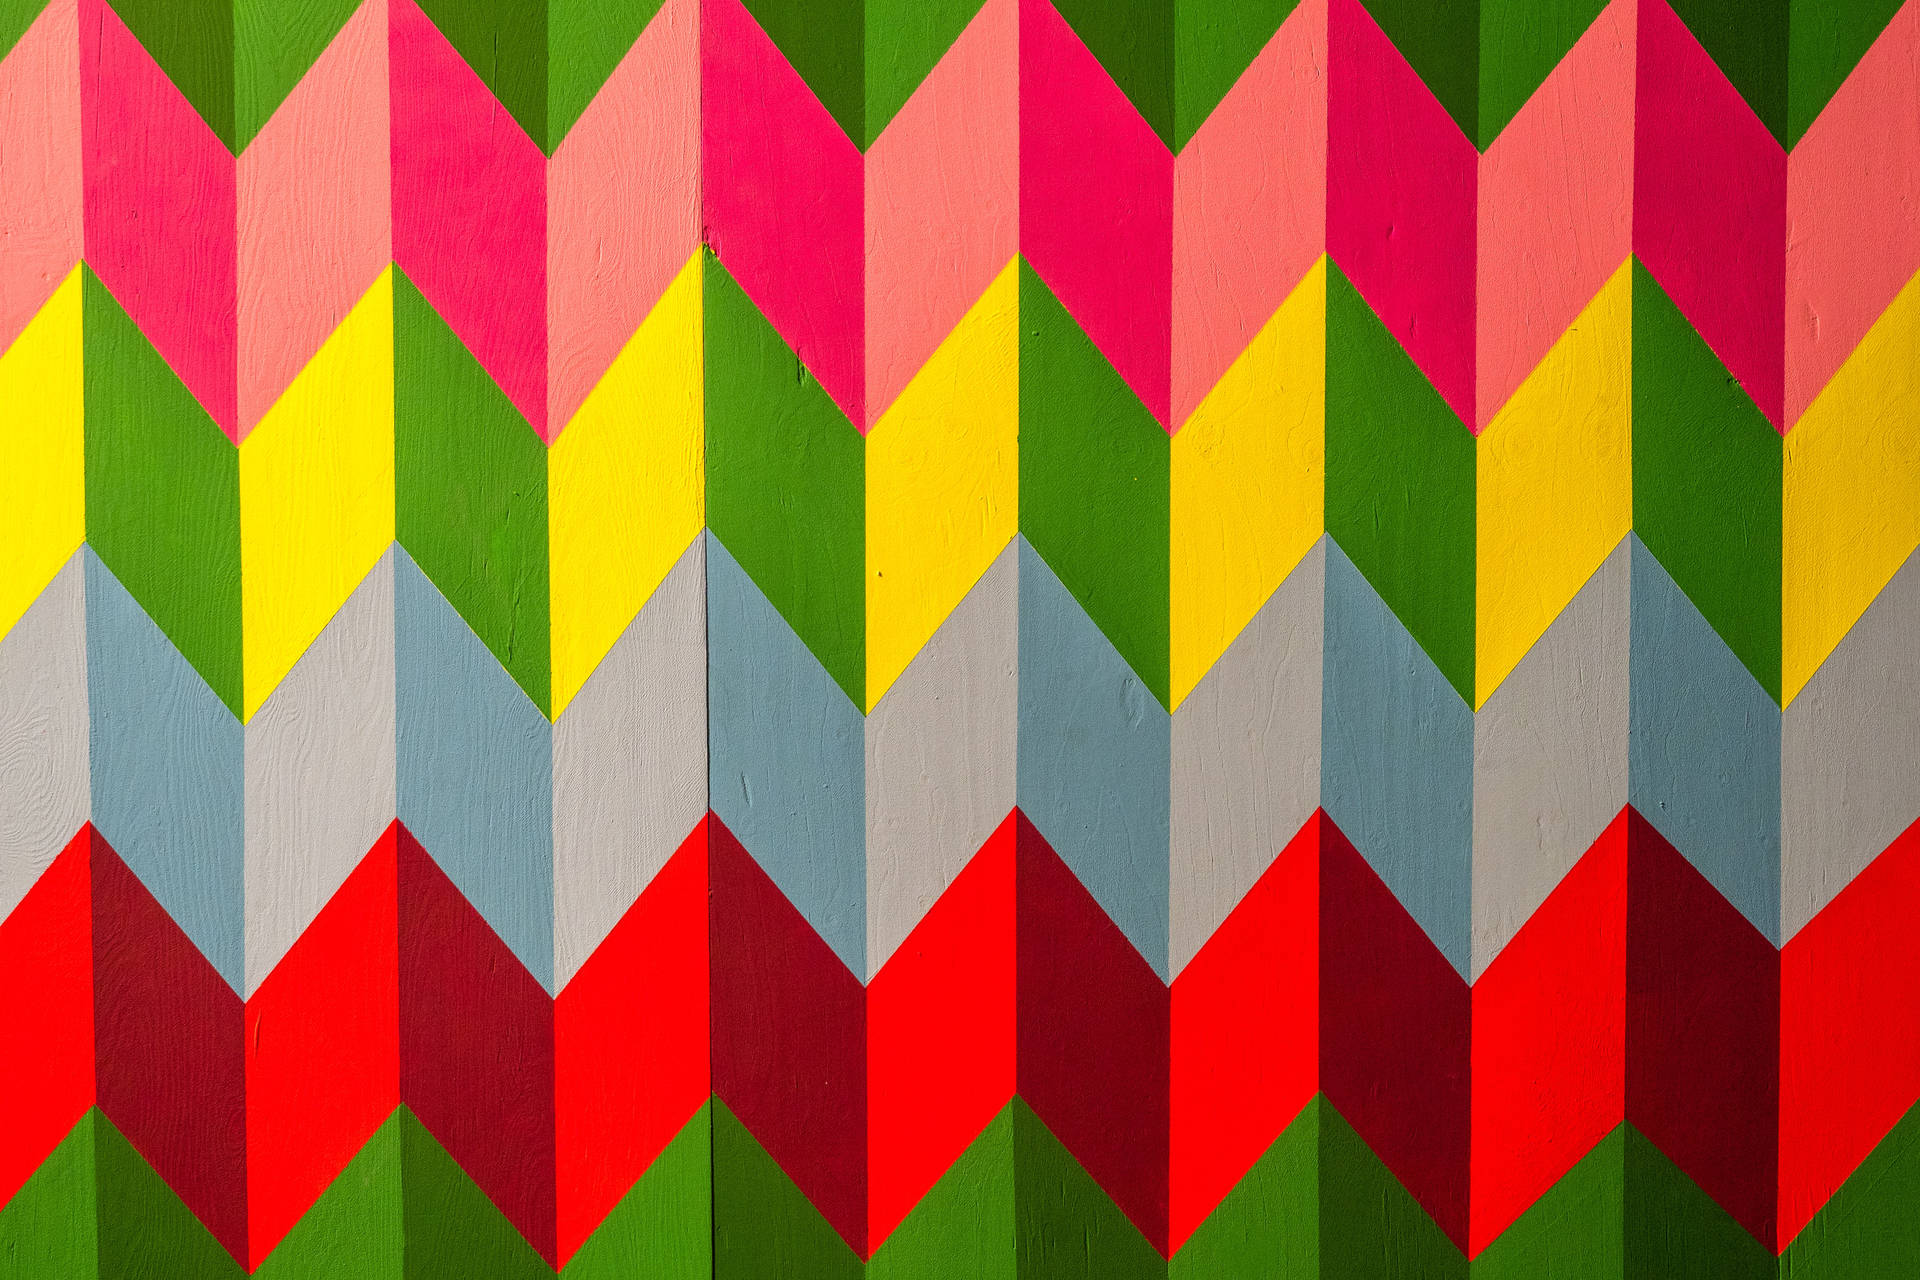 Let the beauty of geometric design add a splash of vibrant color to your walls or digital devices. Wallpaper